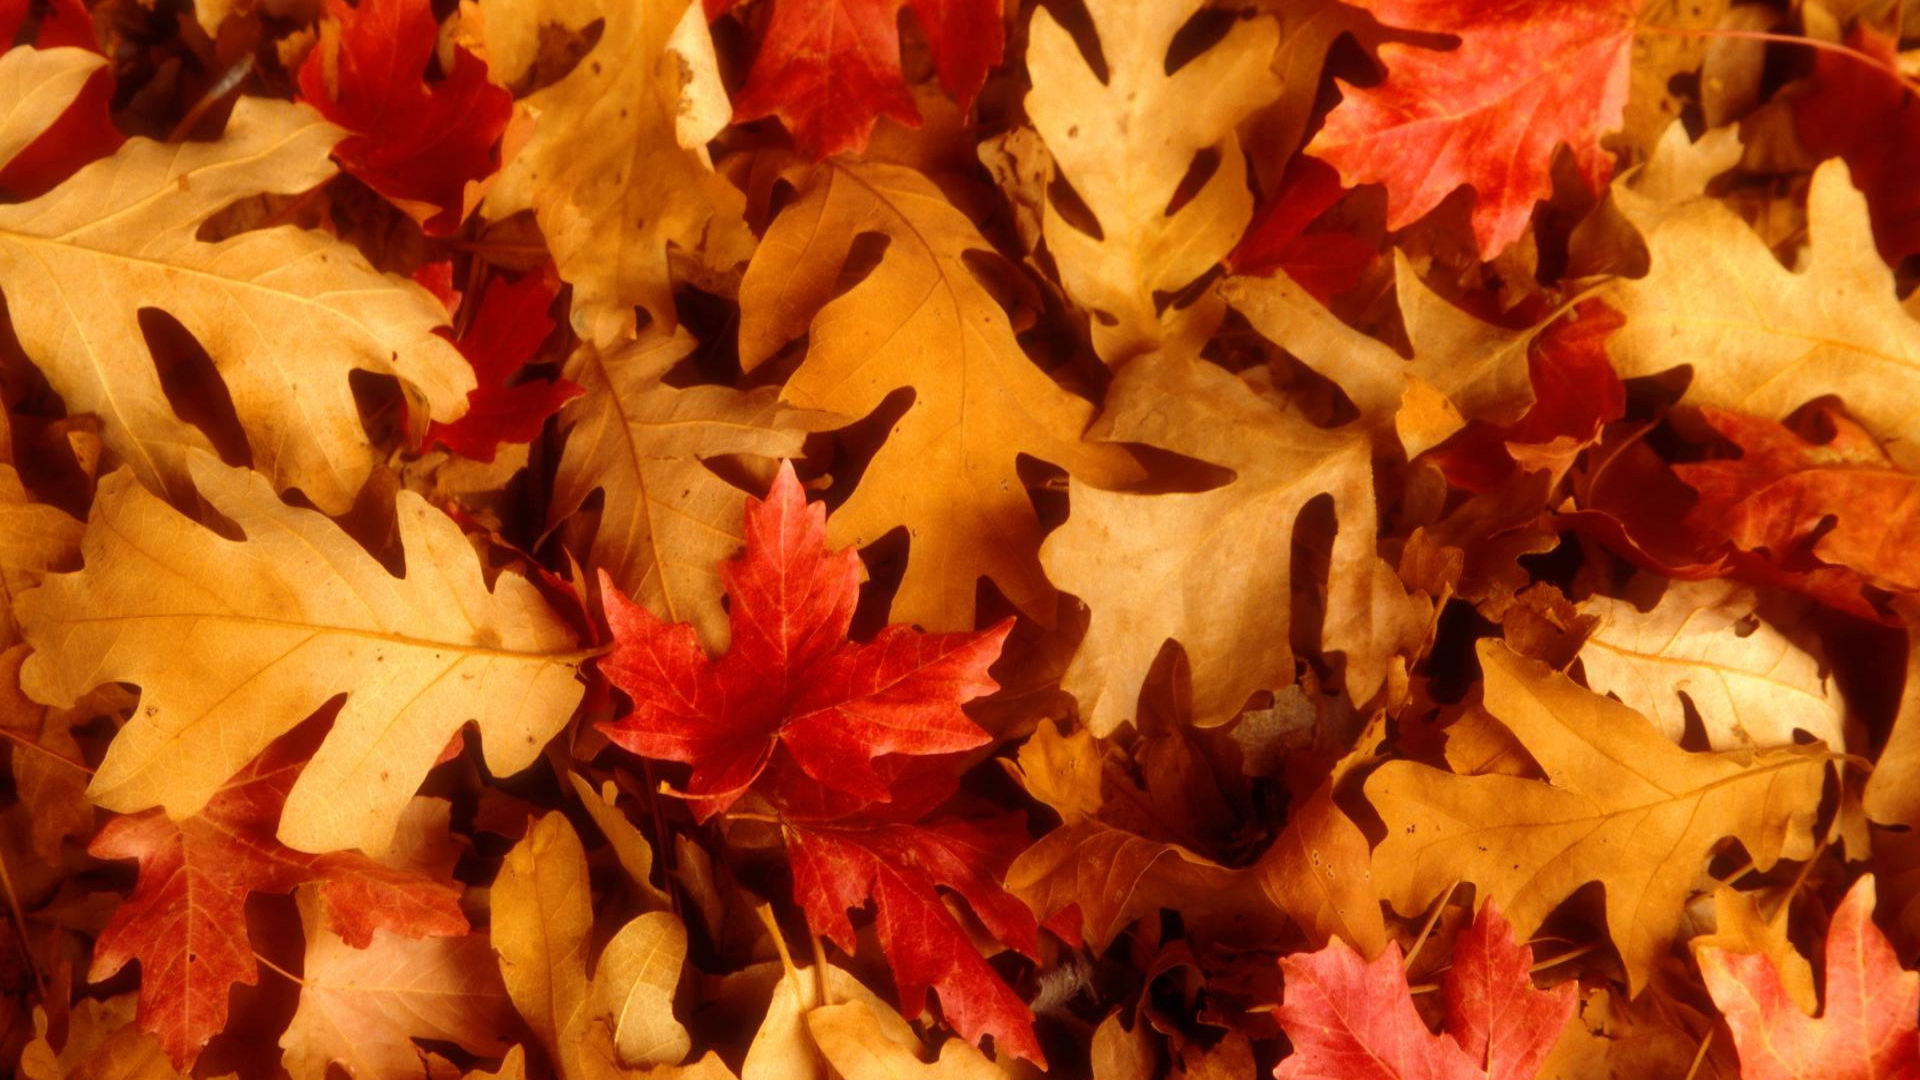 the leafs in autumn are red and orange